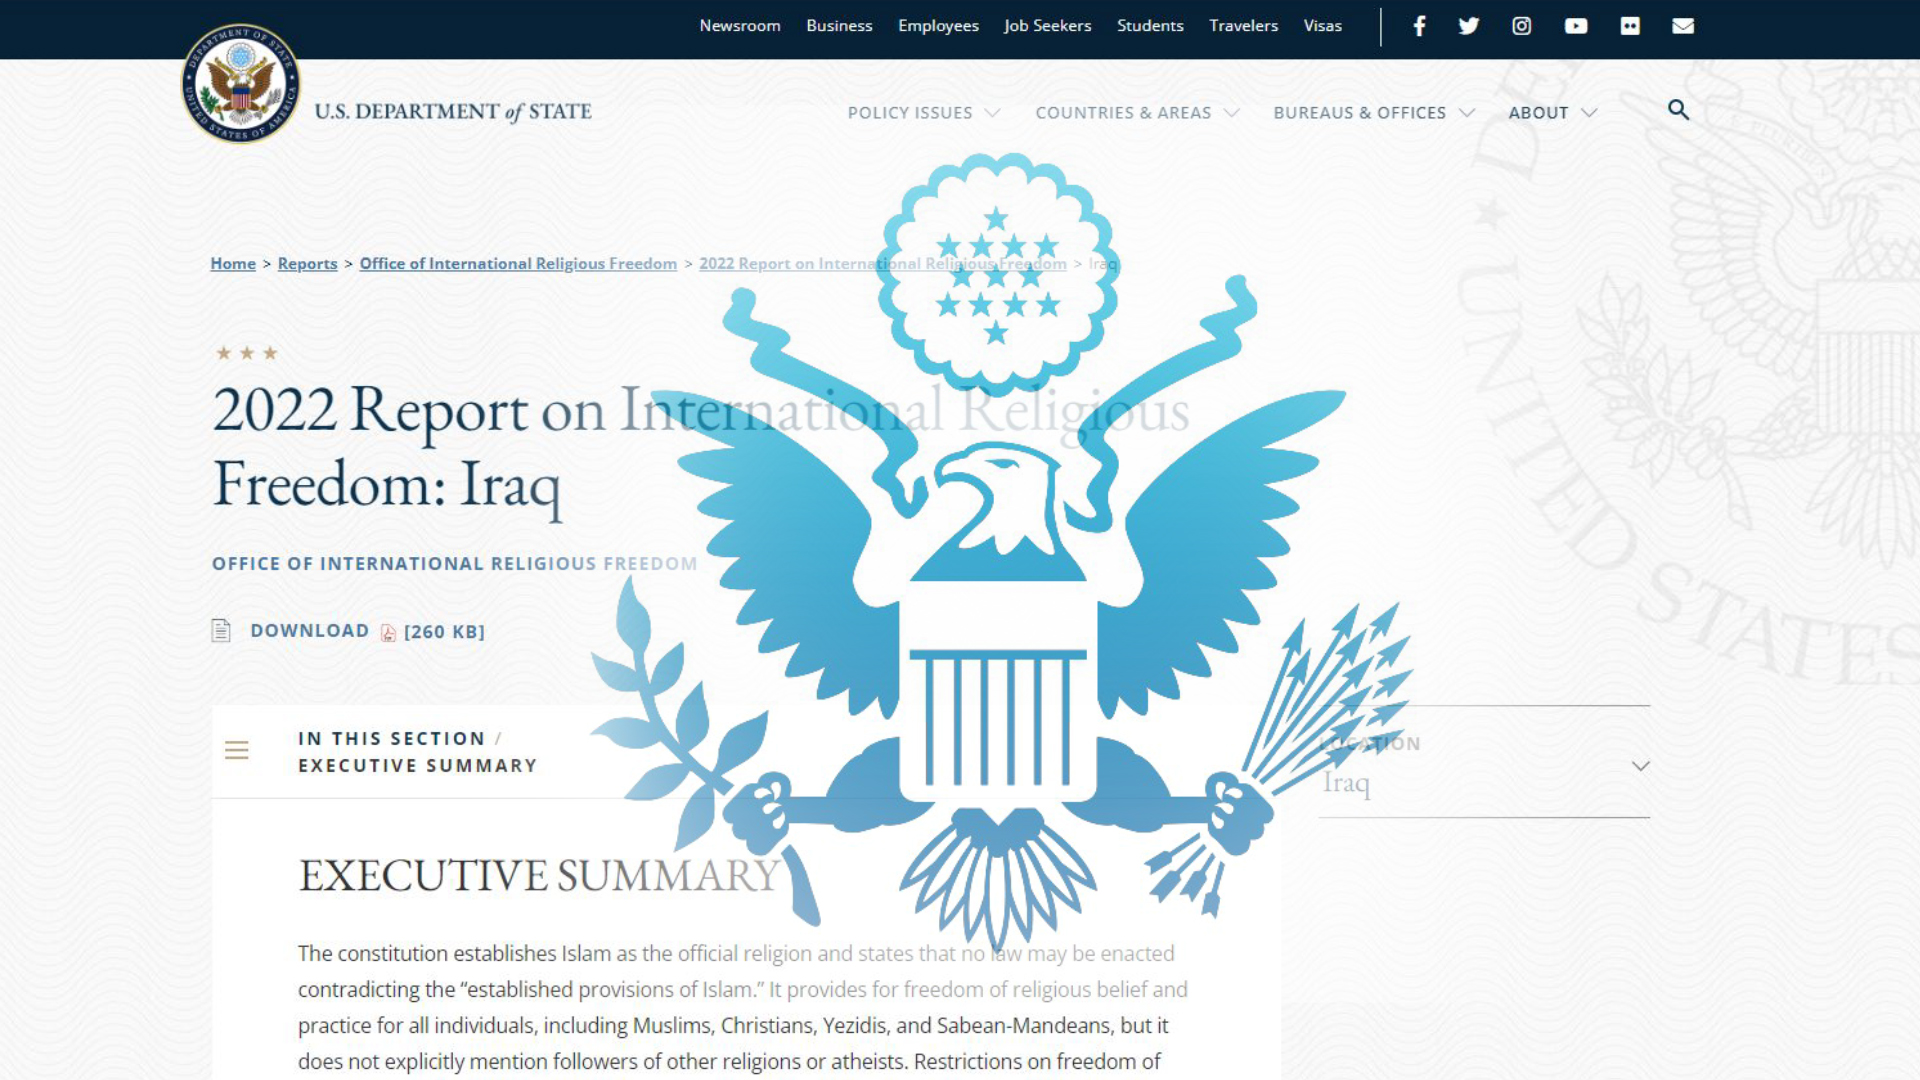 The logo and official website of US State Department